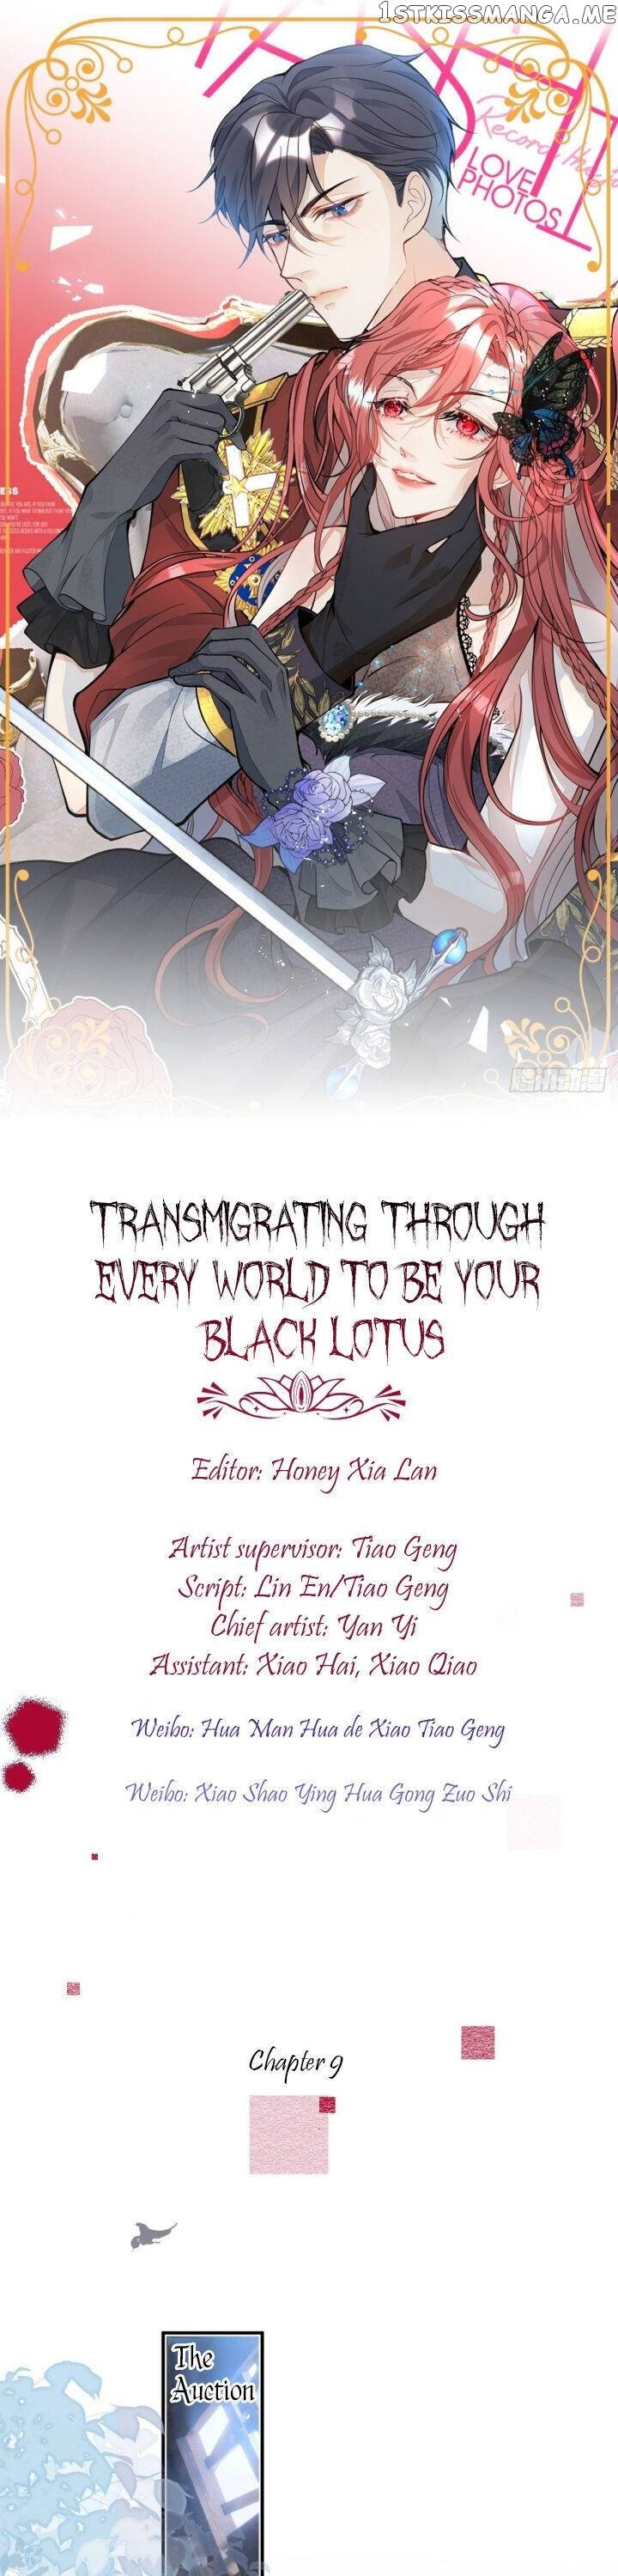 Transmigrating Through Every World To Be Your Black Lotus chapter 9